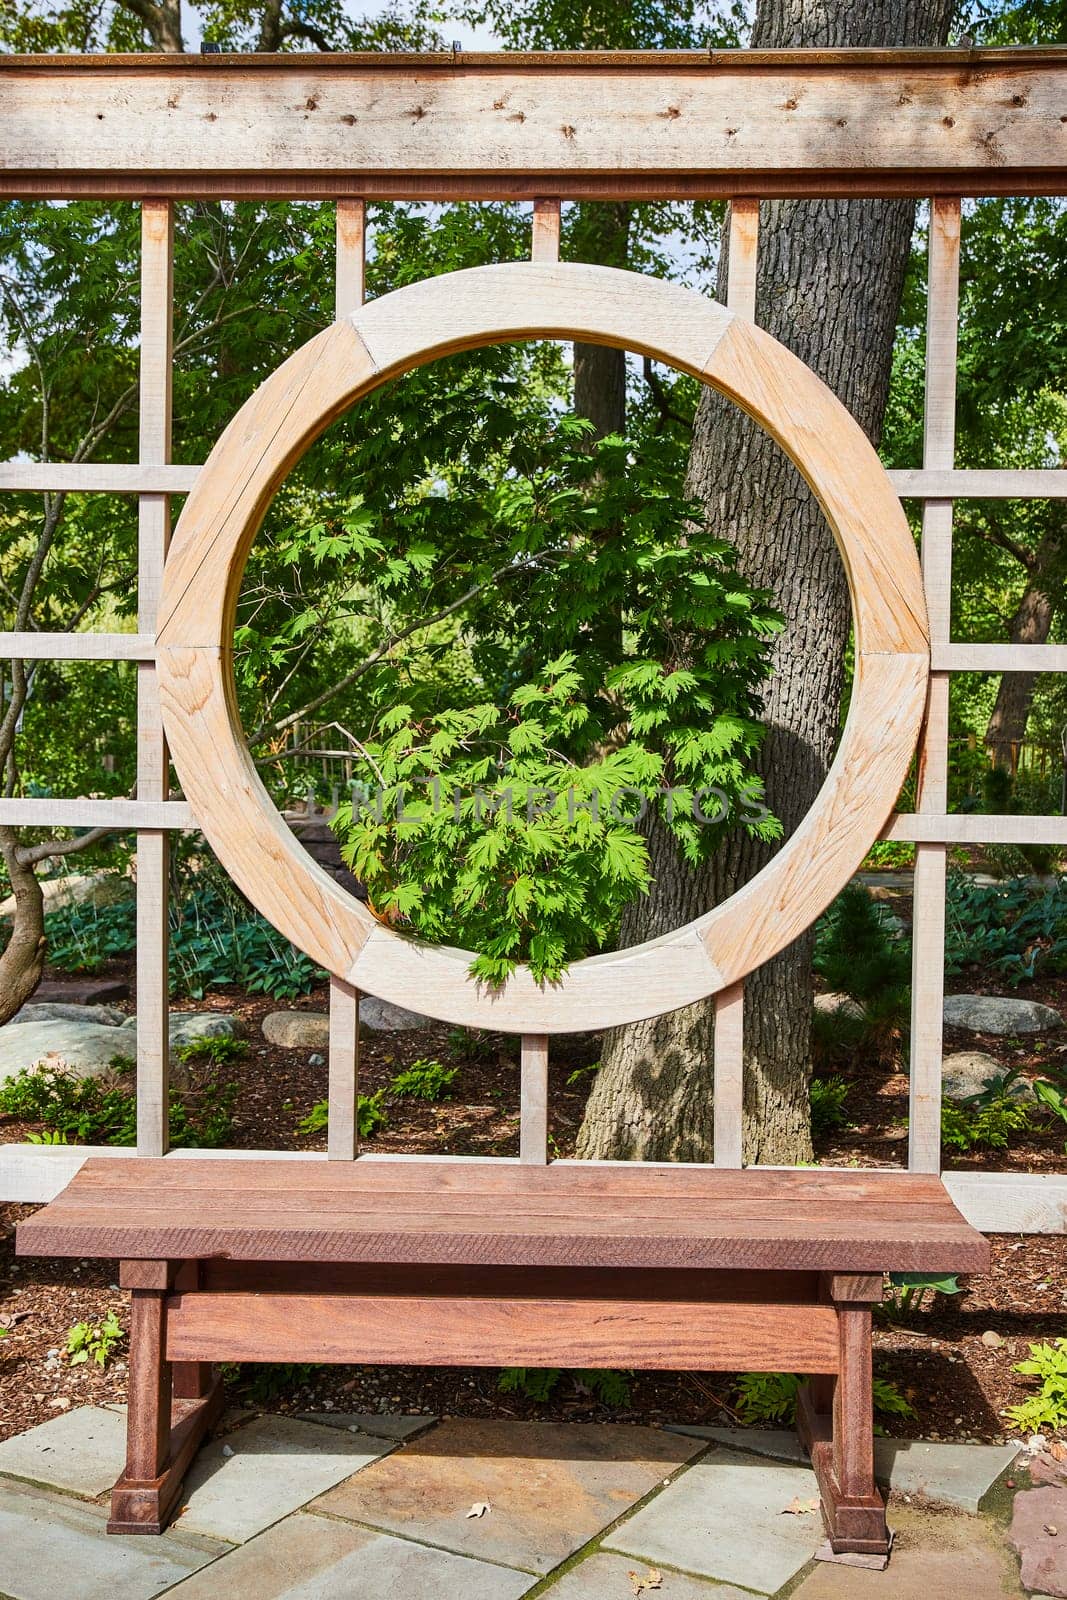 Circular Wooden Garden Frame with Bench and Lush Foliage by njproductions